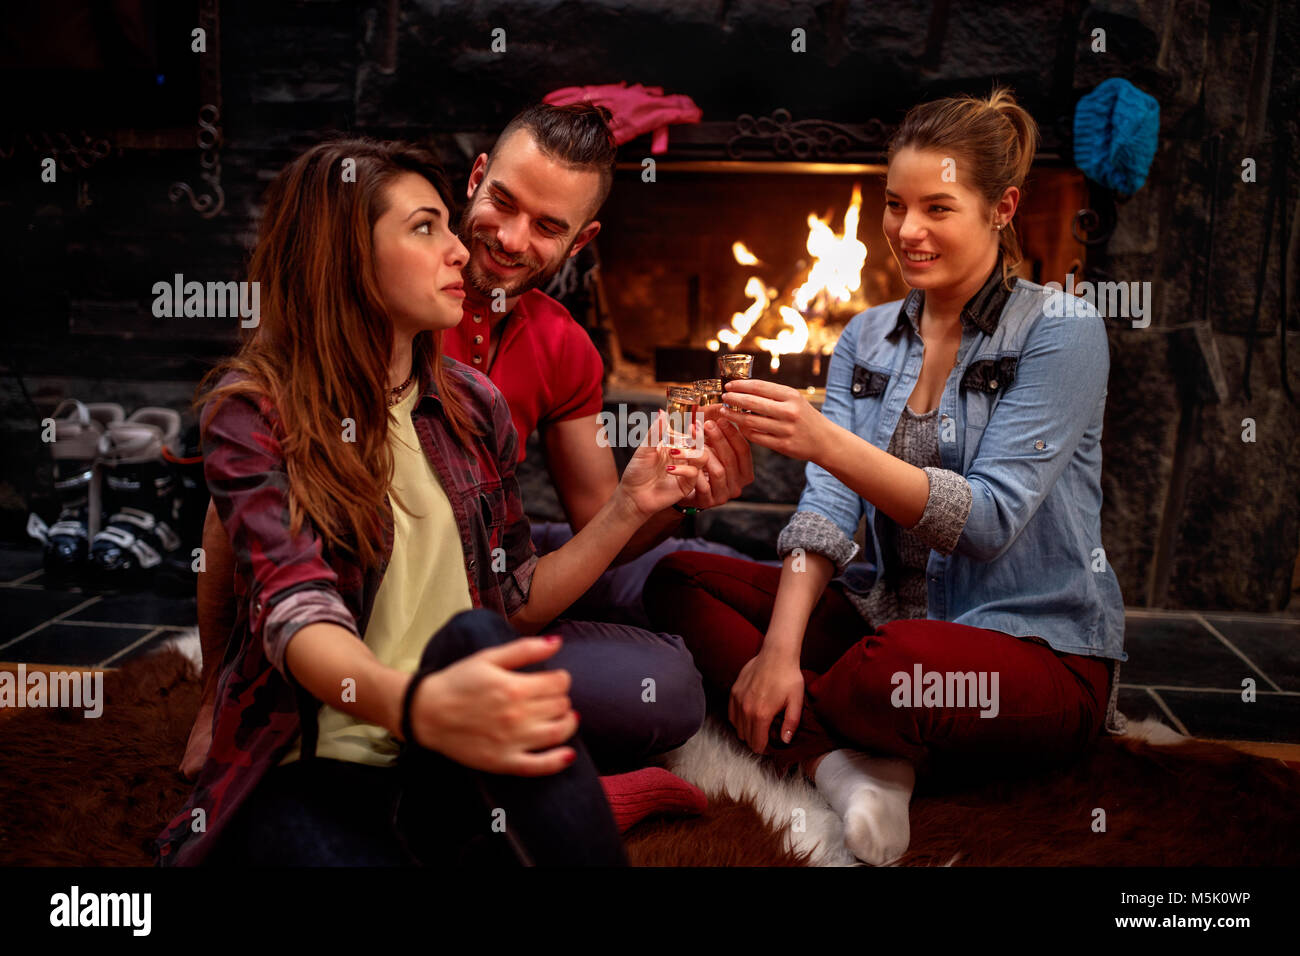 Time of relaxing after skiing- Happy friends cheering with drinks together Stock Photo